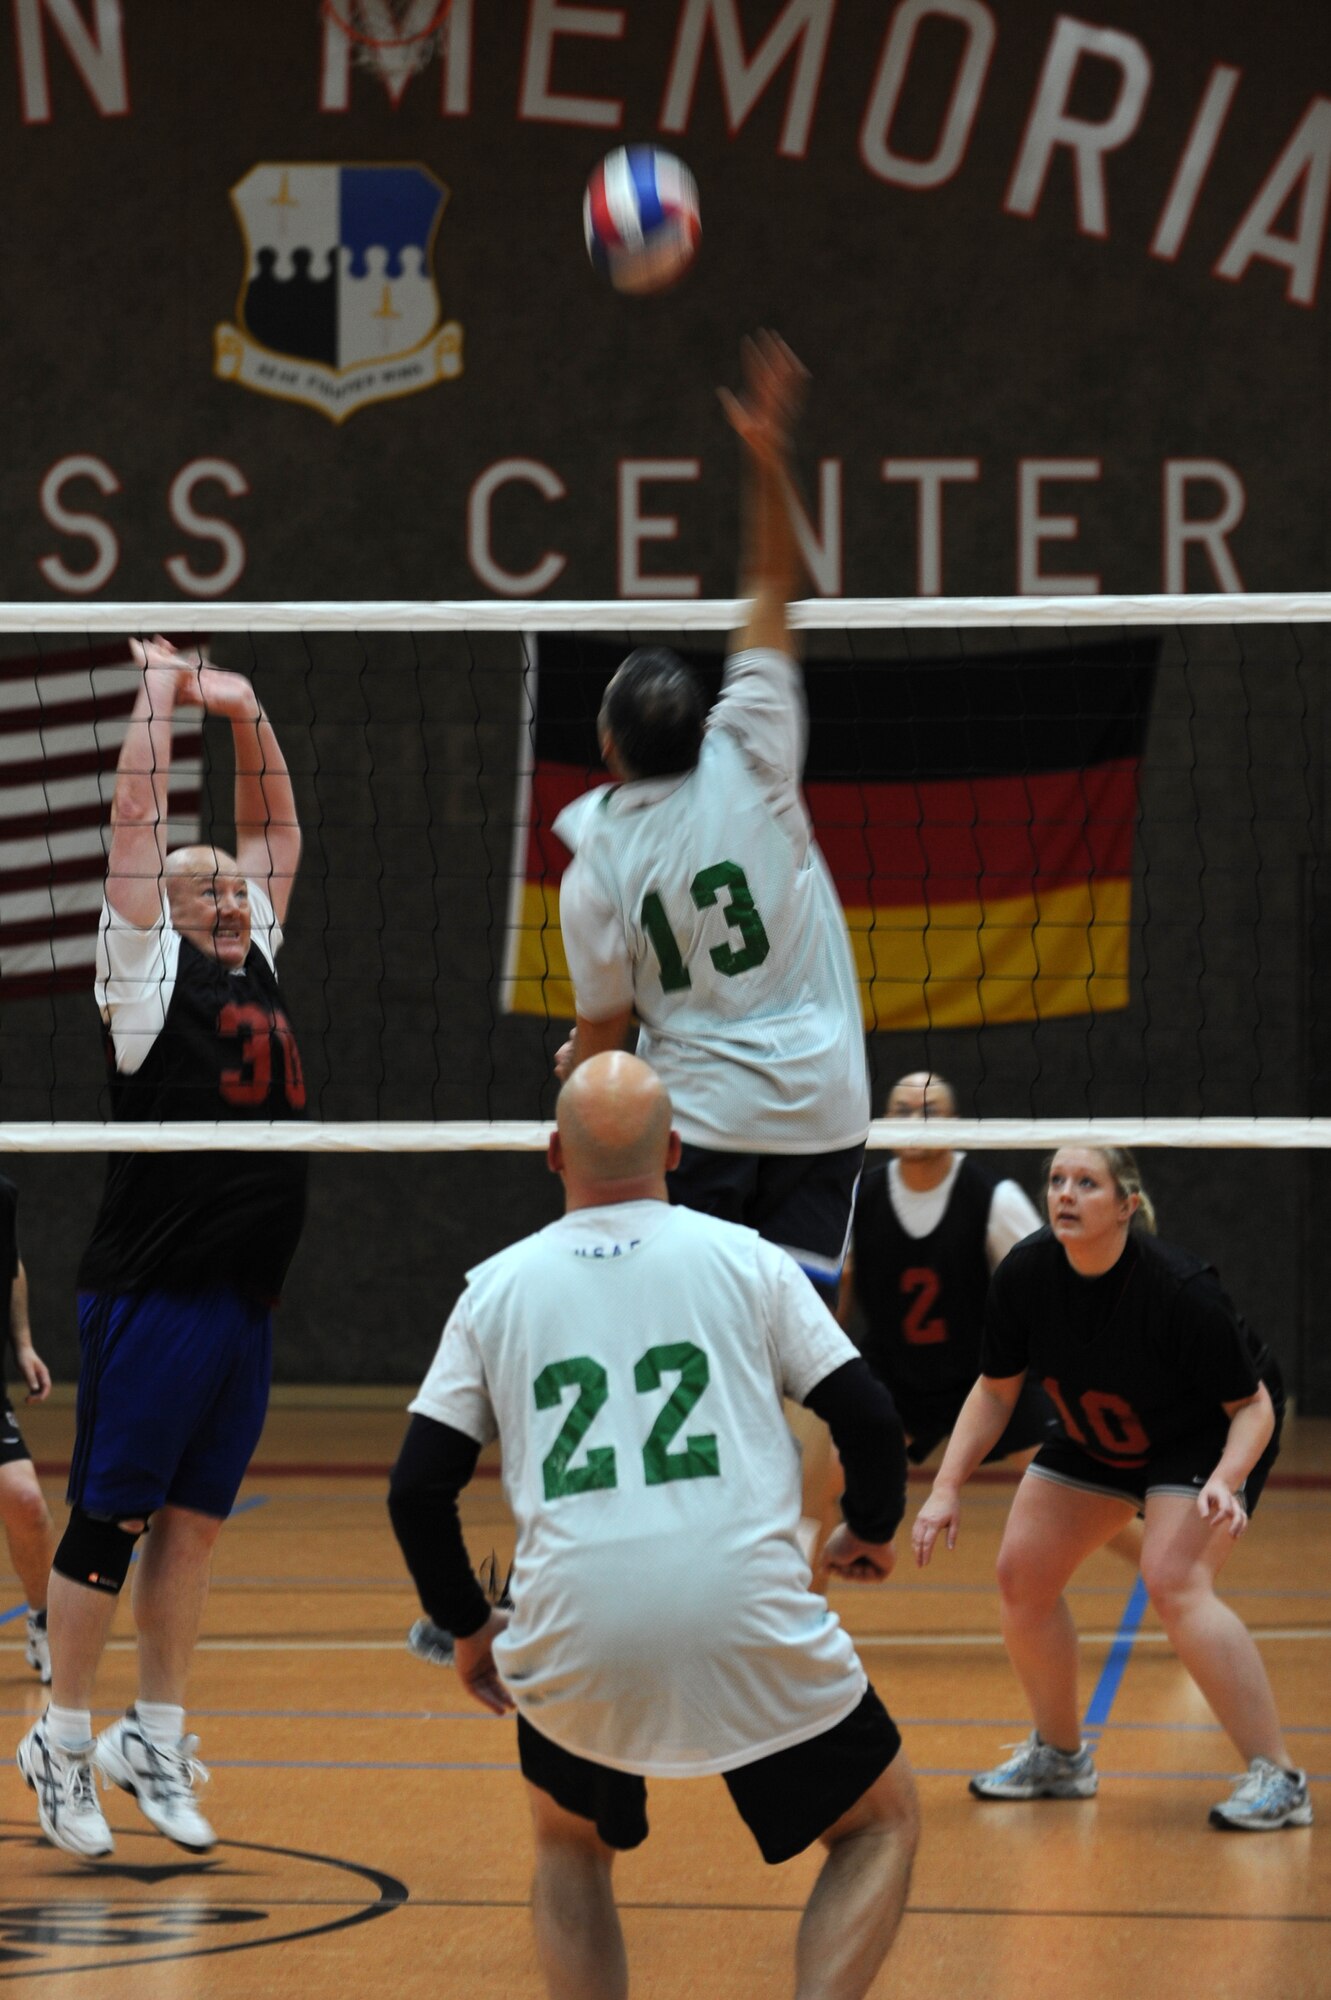 SPANGDAHLEM AIR BASE, Germany – Steven Wilson, 52nd Force Support Squadron, number 30, goes up to block a volleyball spiked by Jose Becerra, 606th Air Control Squadron, number 13, during an intramural volleyball game at the Skelton Memorial Fitness Center here Feb. 15. FSS defeated ACS in two sets, 25-16 and 26-24.  This match kicked off the intramural volleyball season, and games will be played Monday – Thursday beginning at 6:30 p.m. at the fitness center. (U.S. Air Force photo by Airman 1st Class Matthew B. Fredericks/Released)